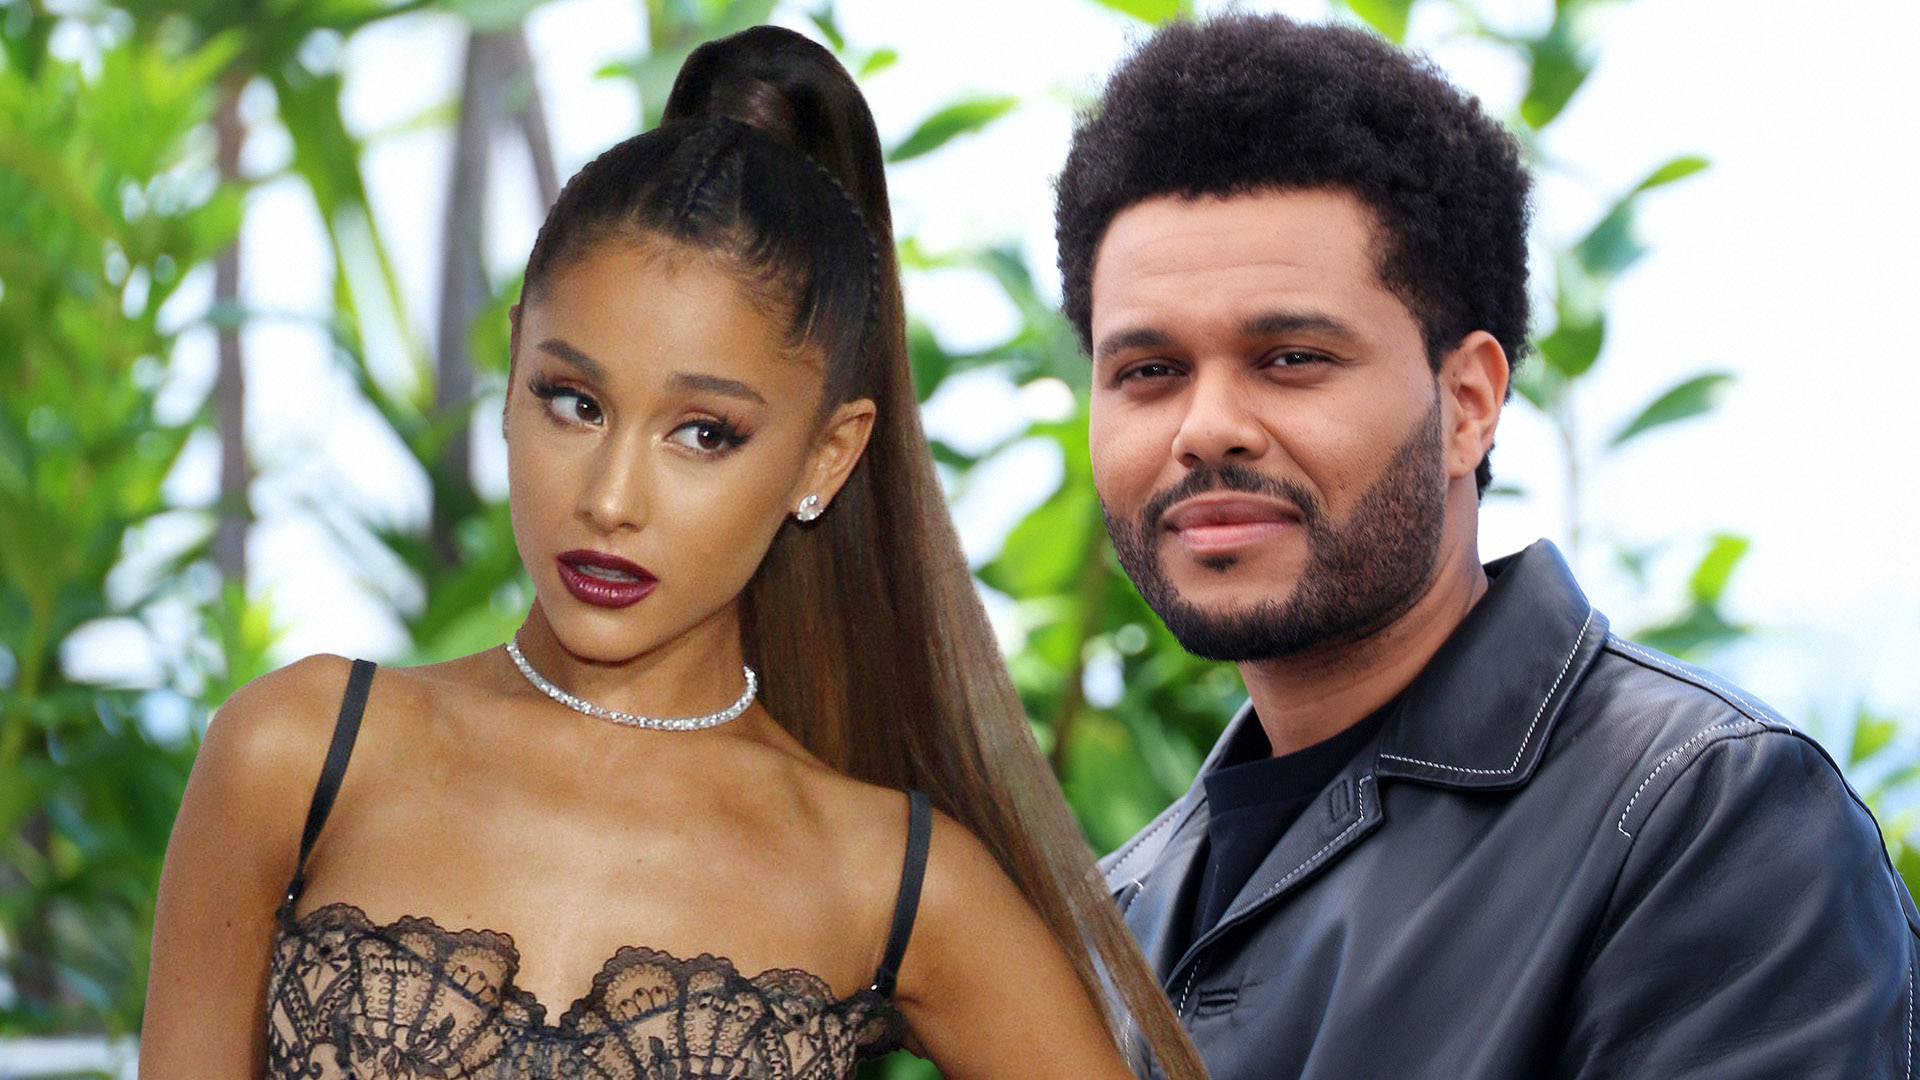 Have The Weeknd & Ariana Grande Actually Dated?